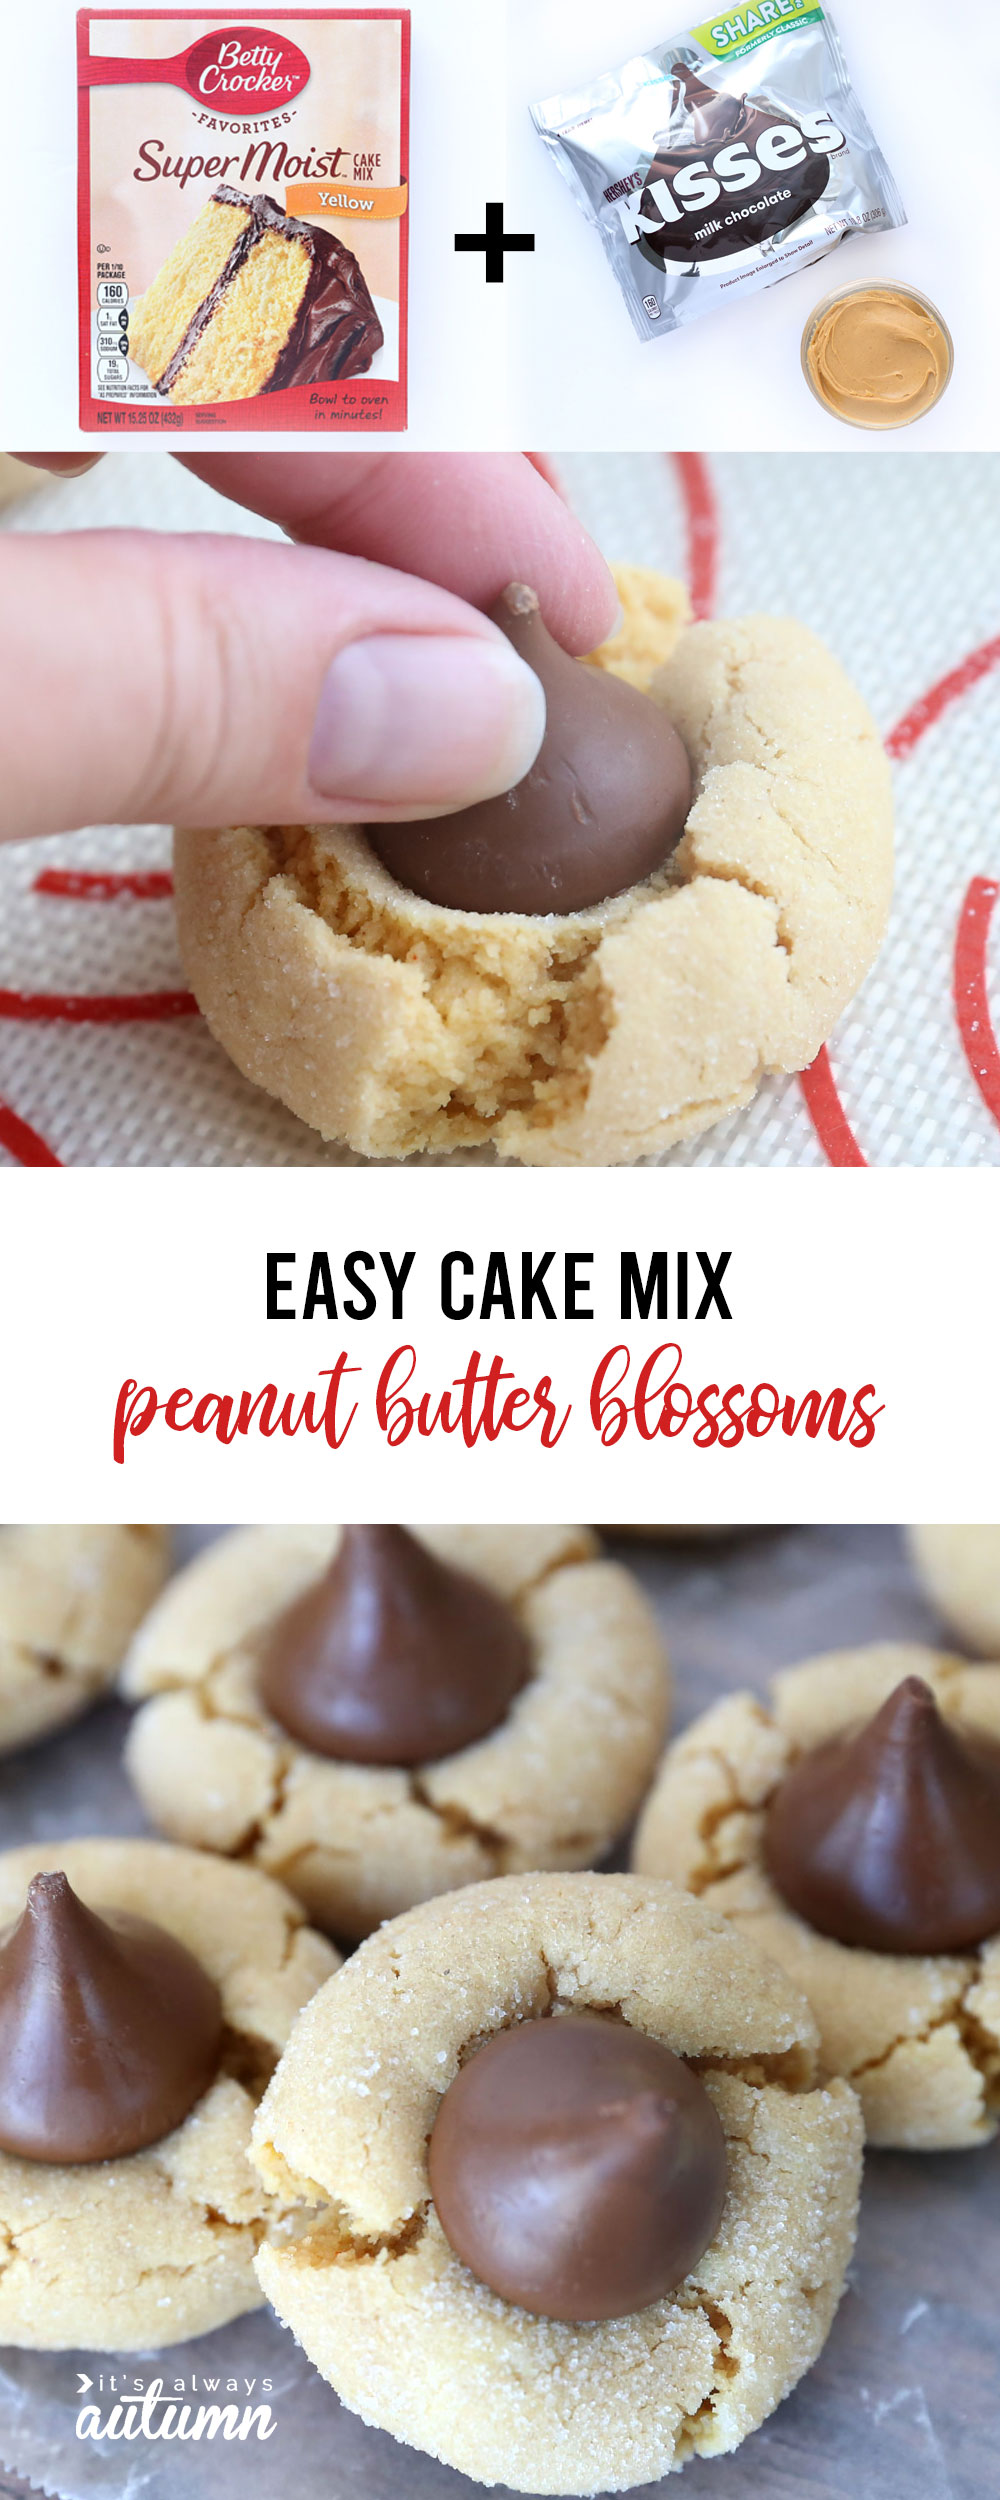 Easy cake mix peanut butter blossoms